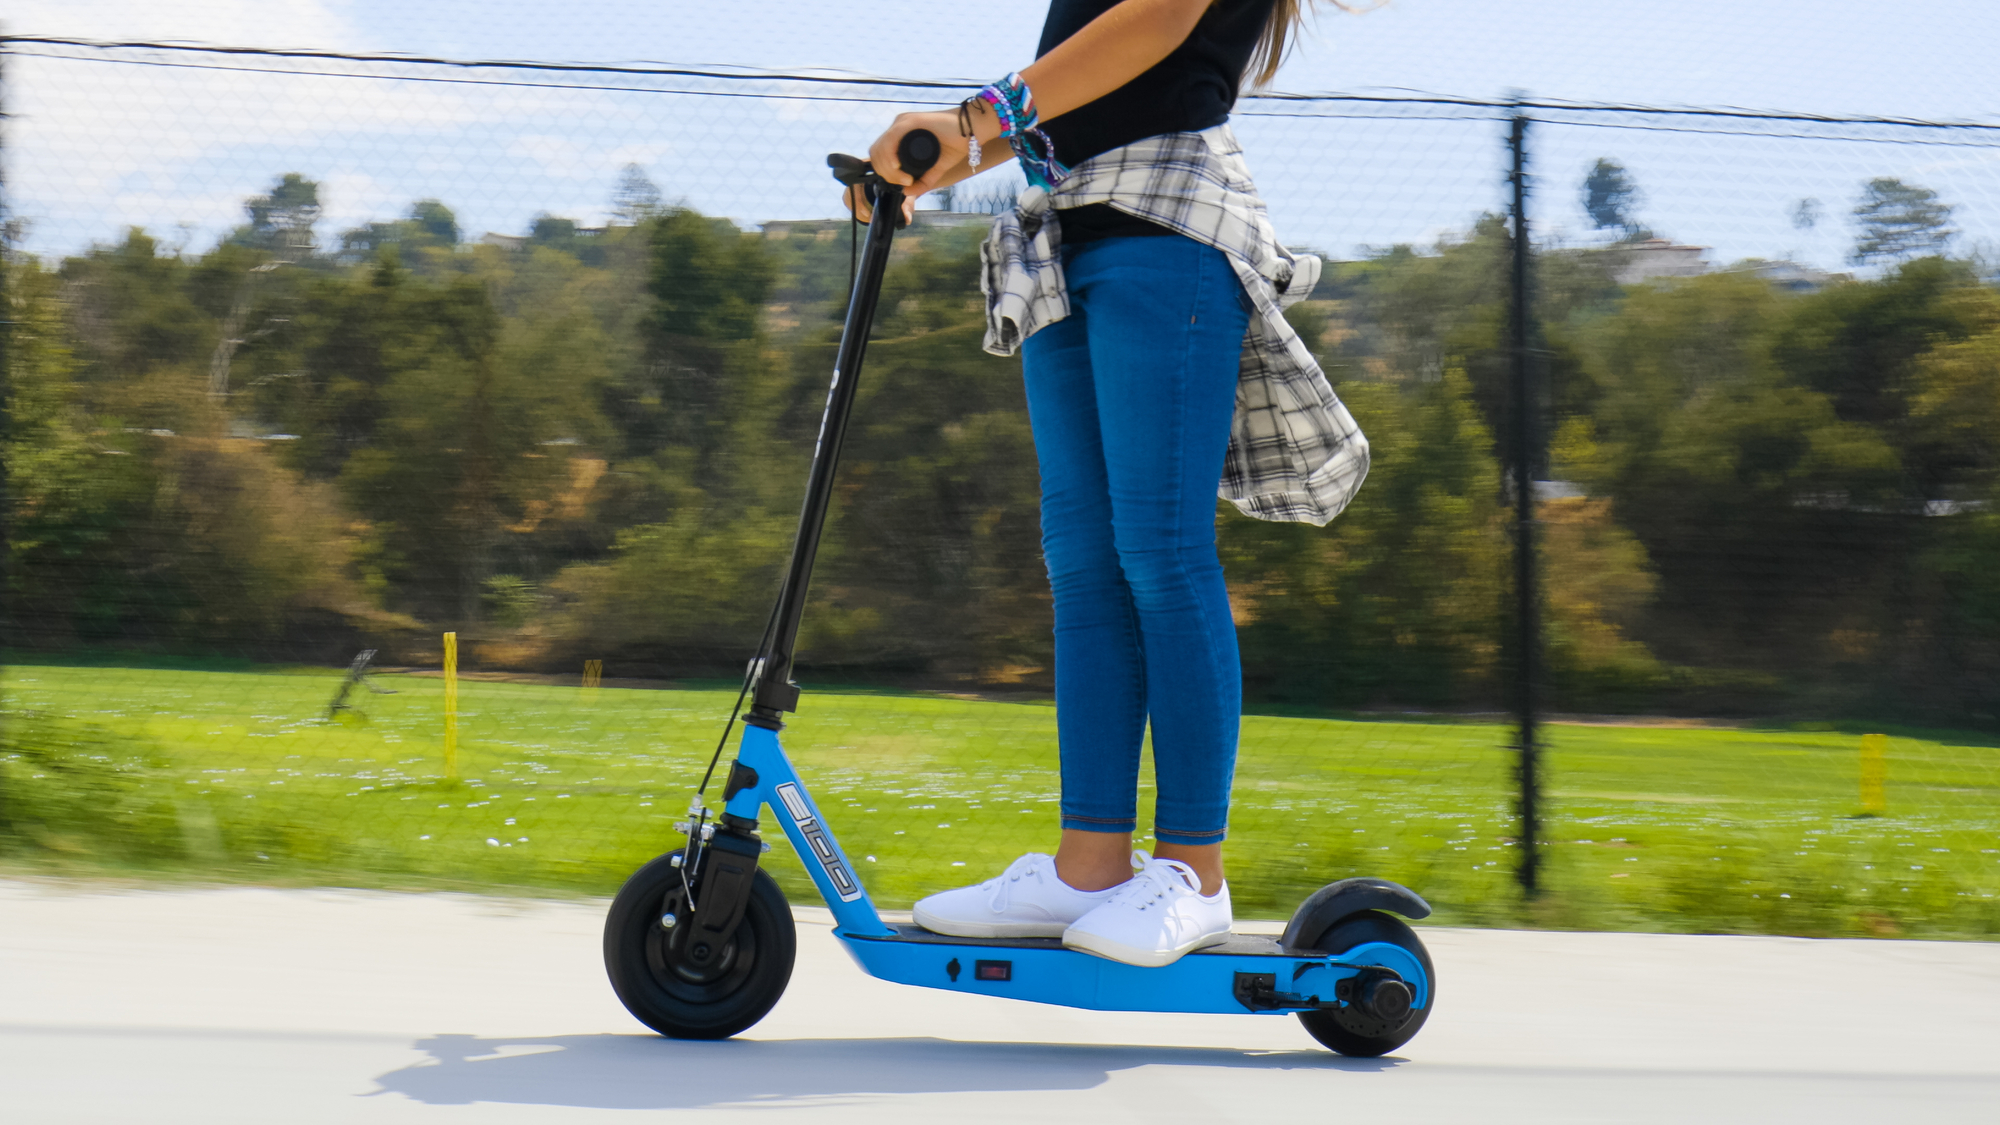 Razor Black Label E100 Electric Scooter – Blue, up to 10 mph, 8" Pneumatic Front Tire, for Kids Ages 8+ - image 13 of 14